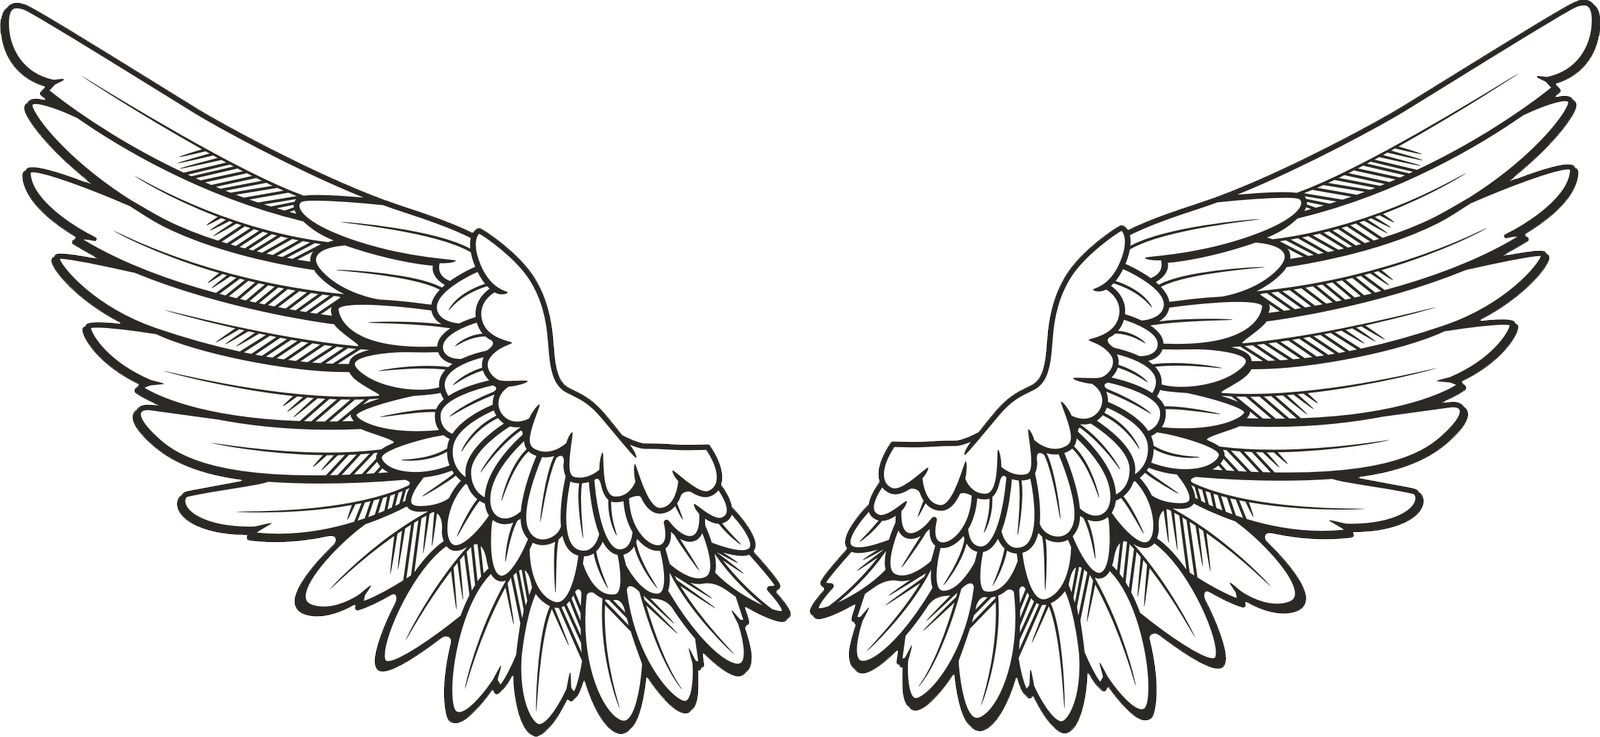 Angel Halo Wings Free Download PNG Image